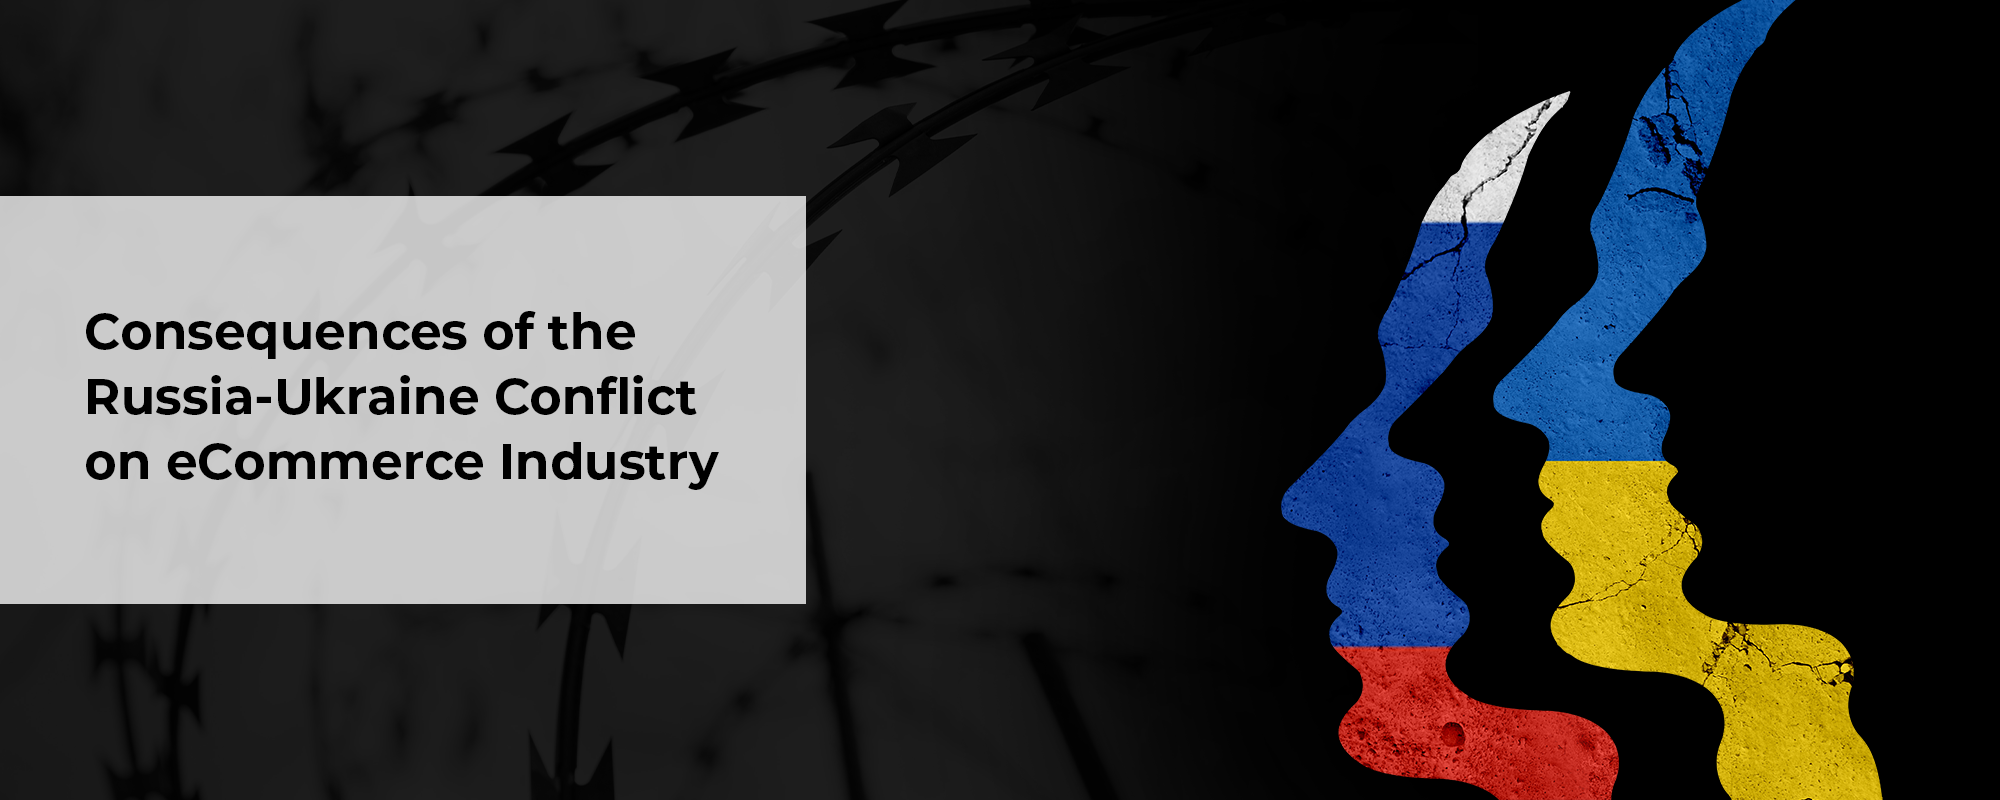 The Impact of the Russia-Ukraine Conflict on the Global Economy & Ecommerce Industry